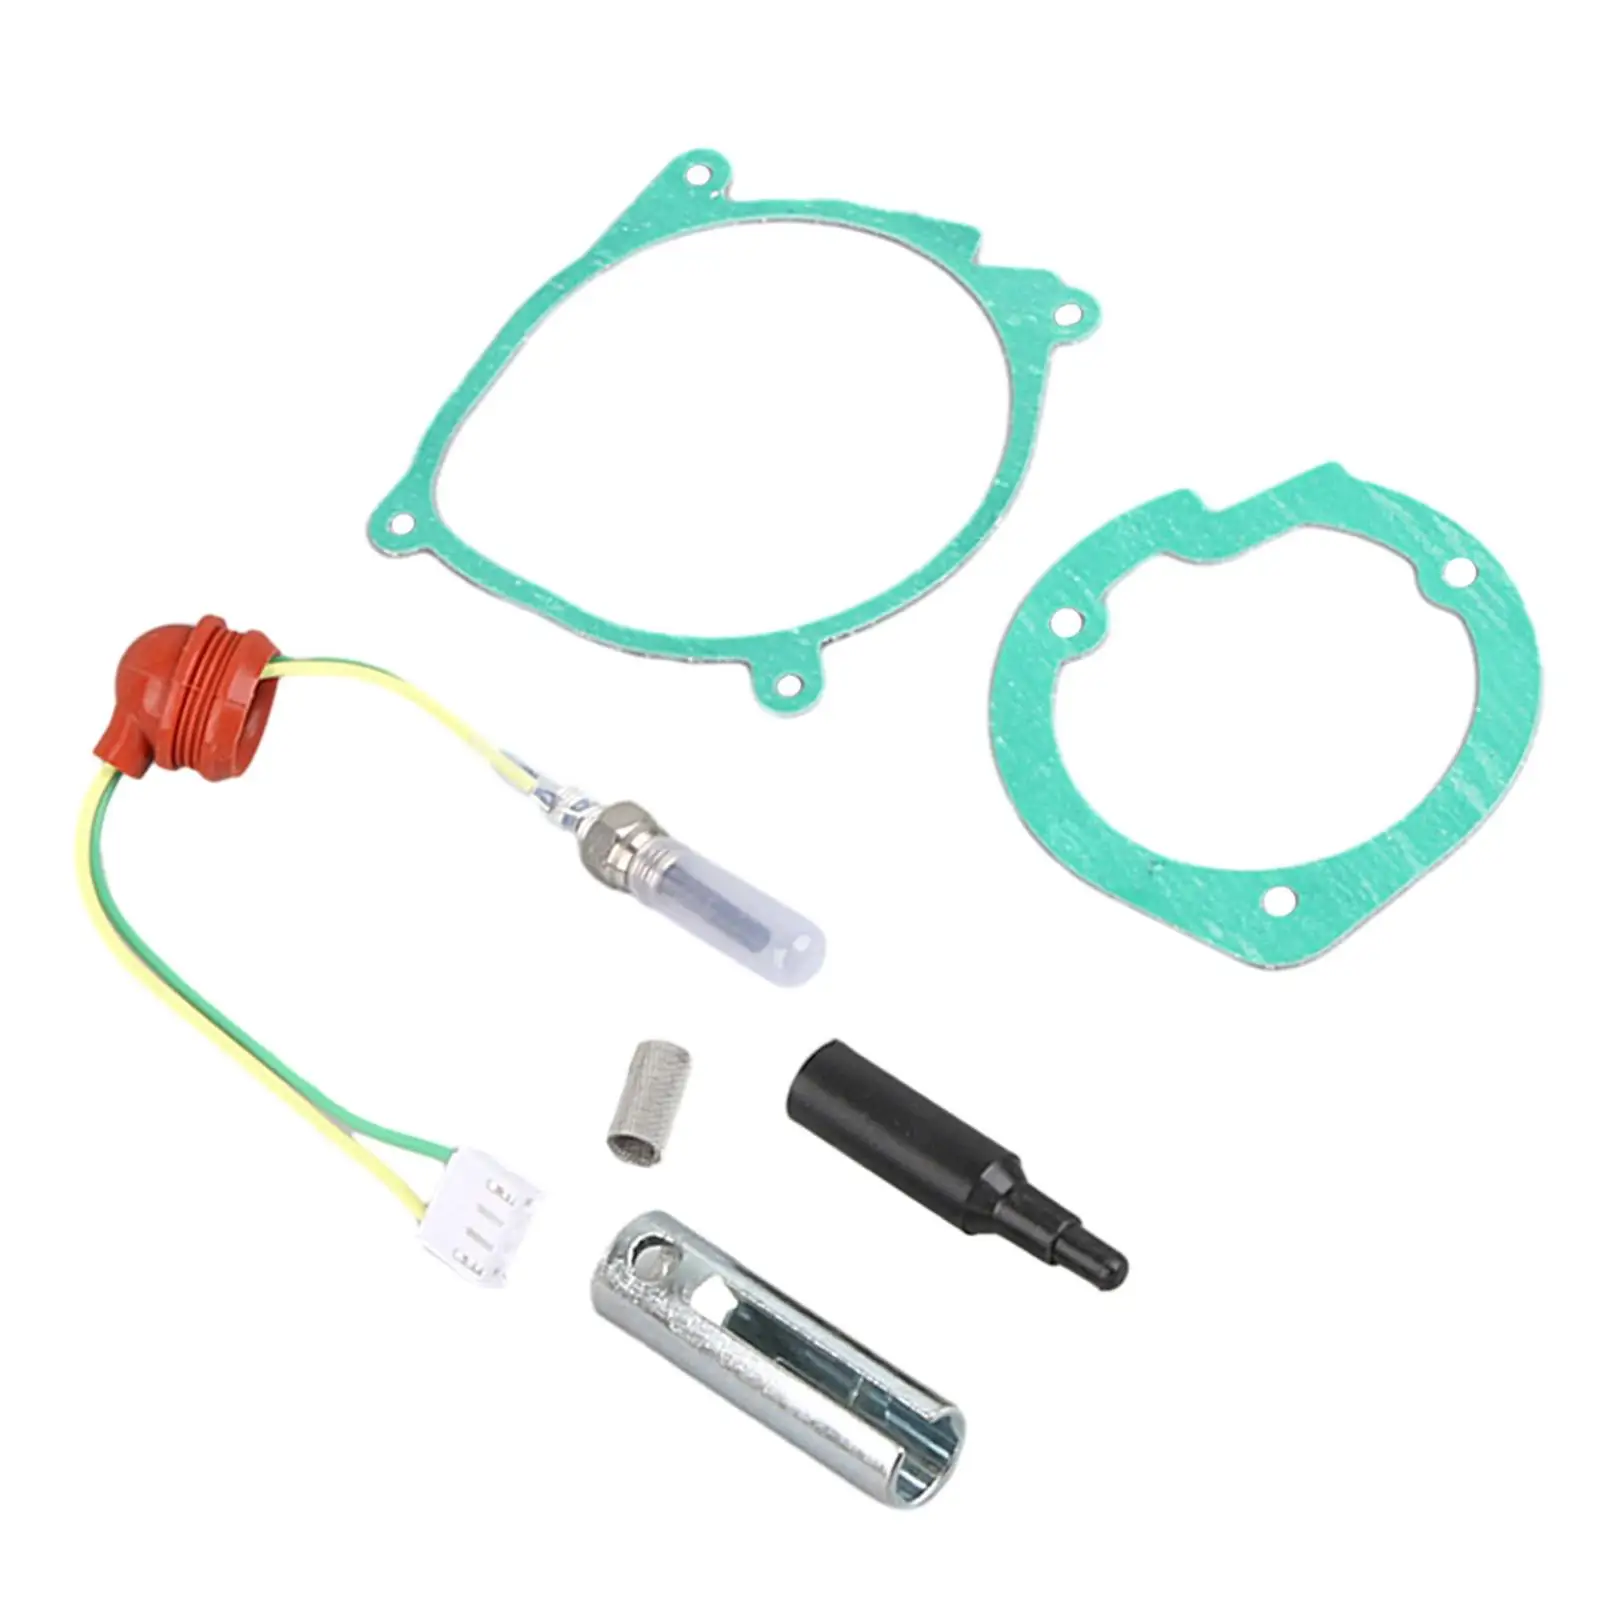 12V Glow Plug Repair Set 5kW with Gaskets Car Air Parking Heater Service Set Easy Installation Accessories Universal